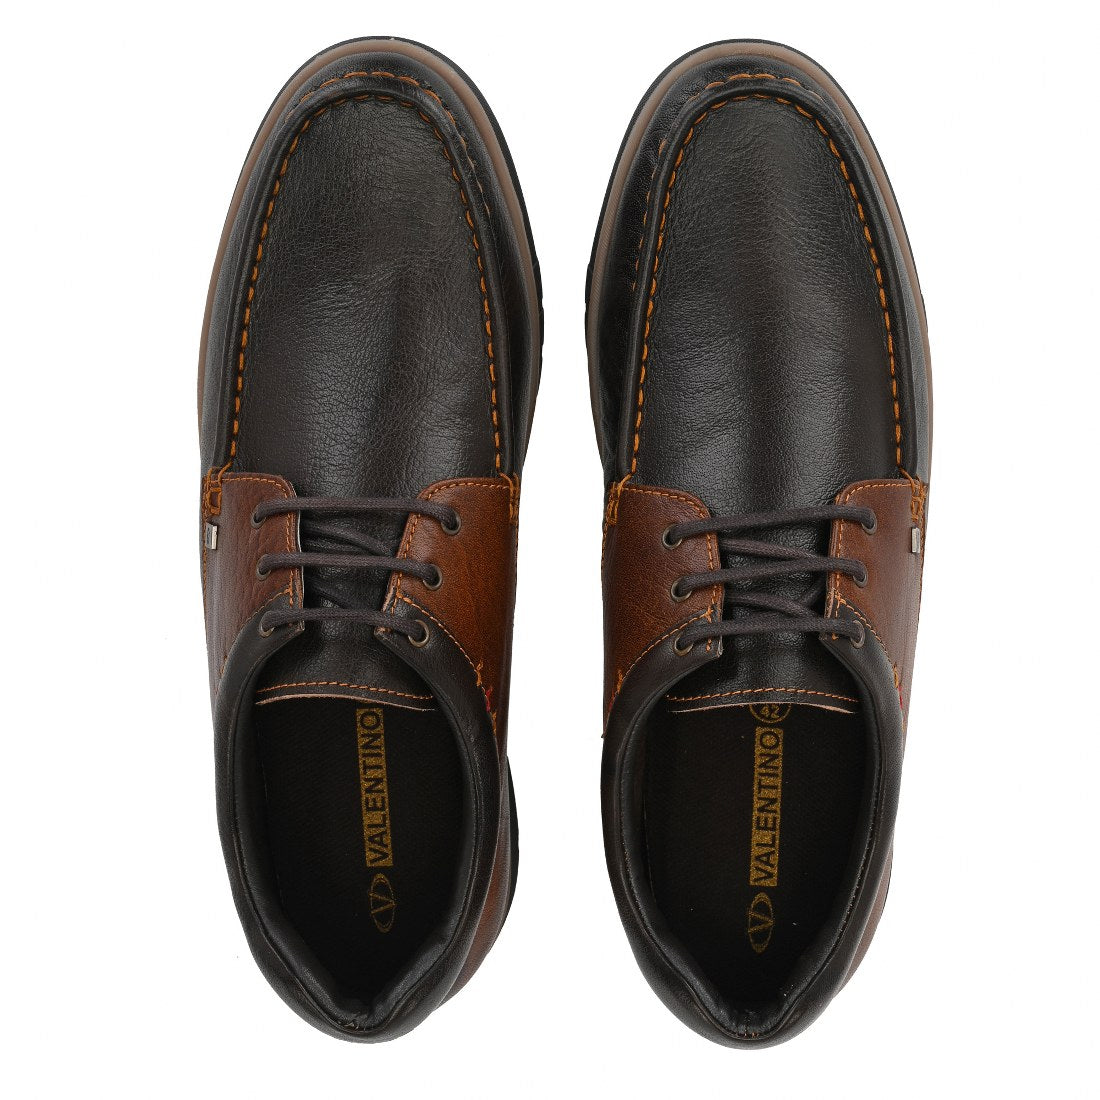 FASCINATE-55 MEN LEATHER BROWN-CHOCO CASUAL LACE UP DERBY